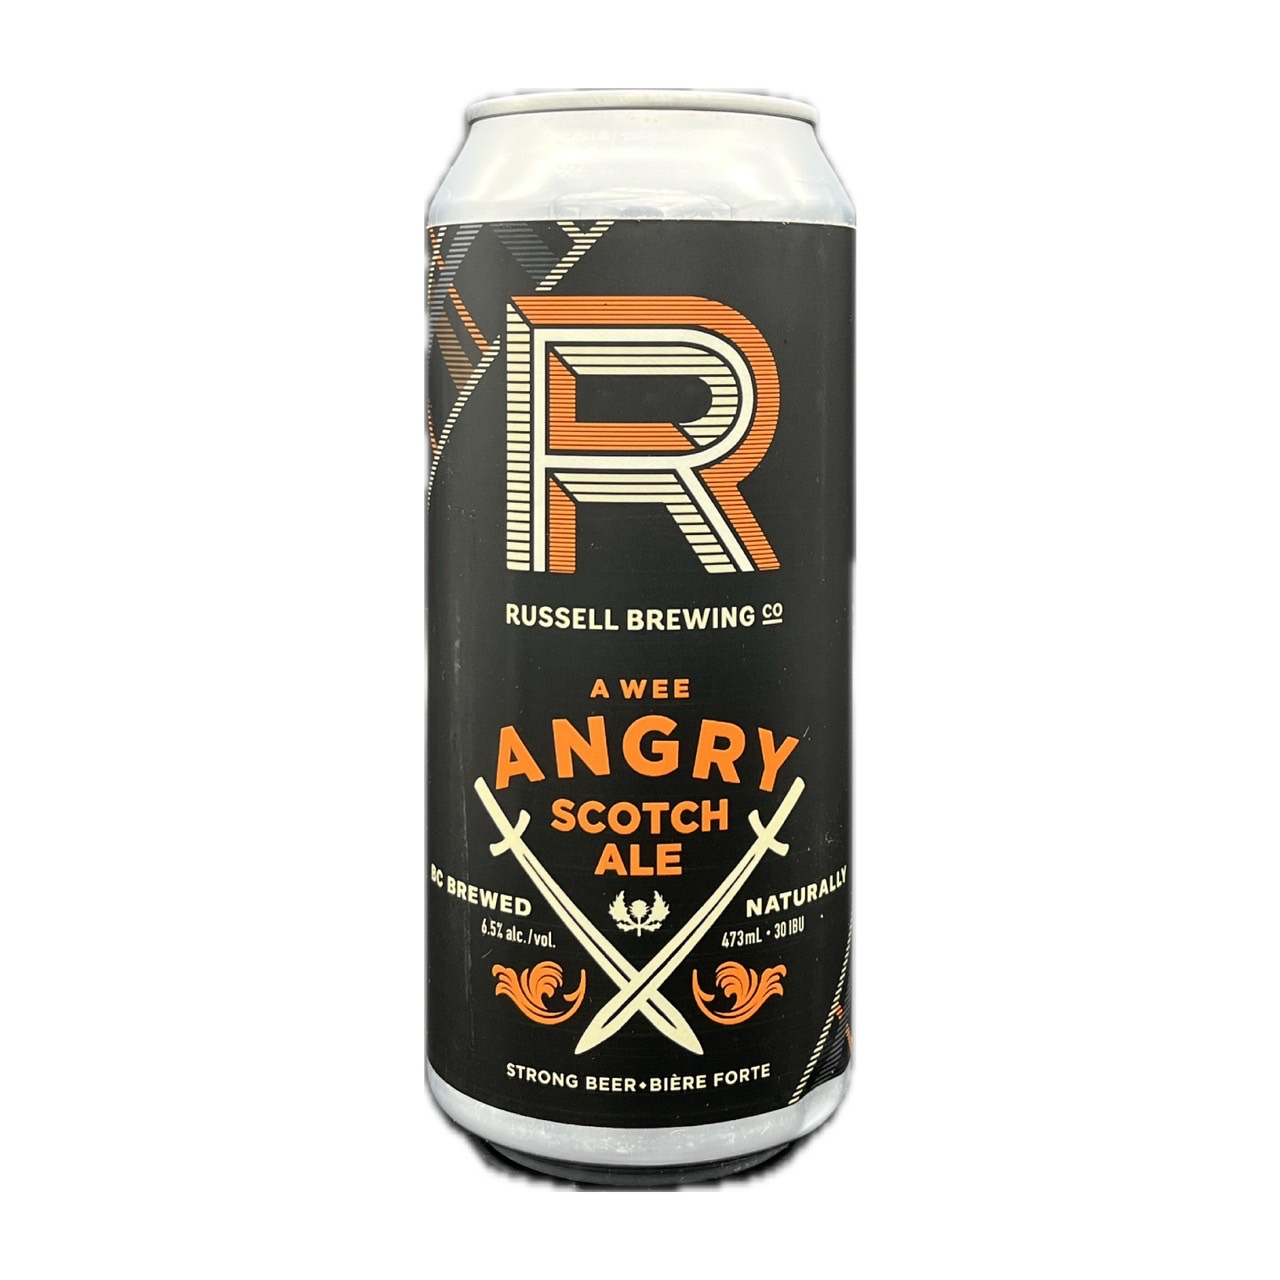 ☆A Wee Angy Scotch Ale/RUSSELL BREWING CO.